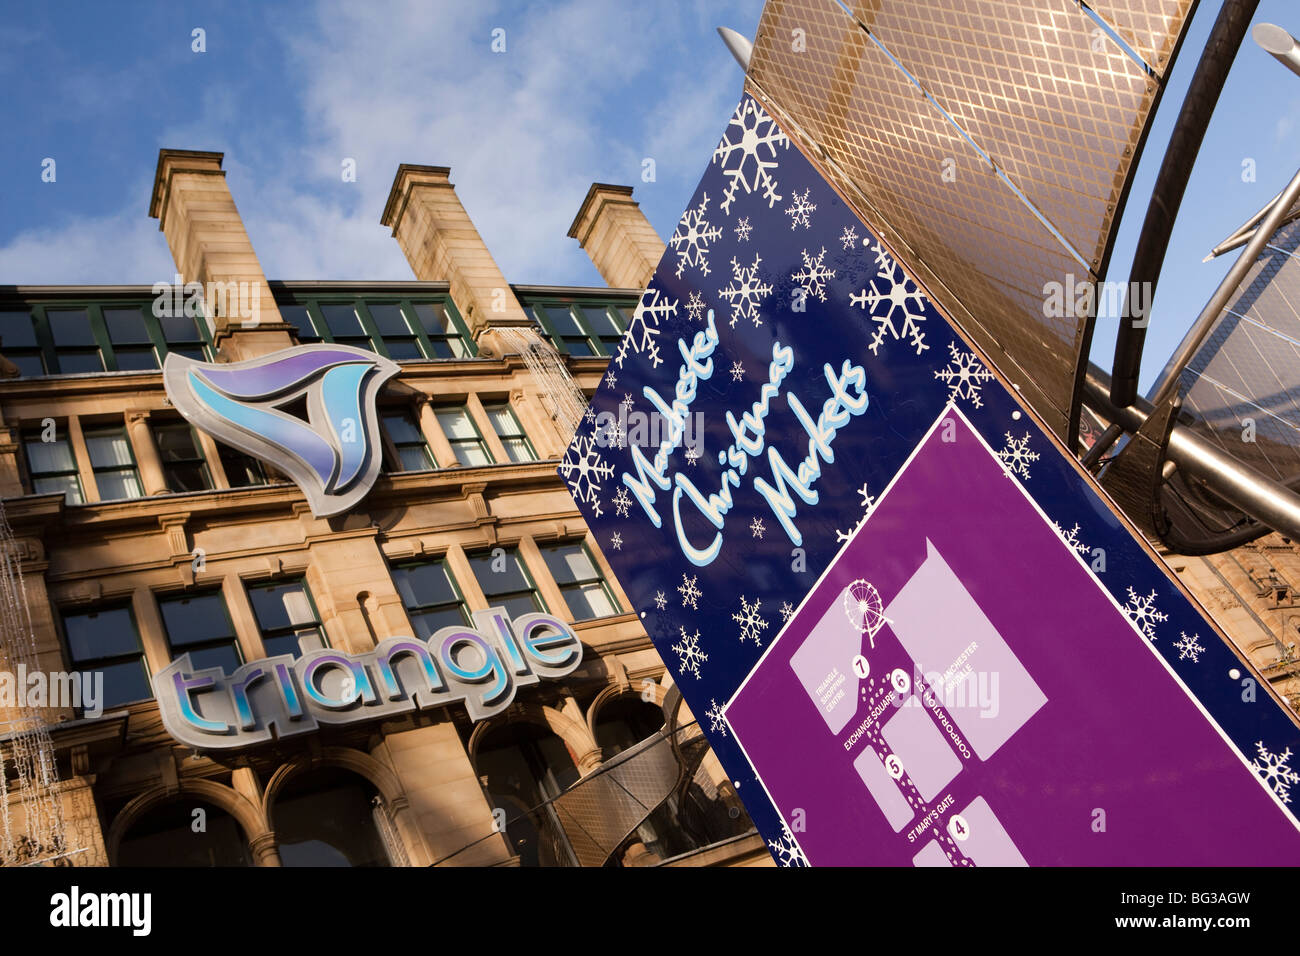 UK, England, Manchester, Cathedral Street, Christmas Markets advertising sign outside the Triangle Stock Photo